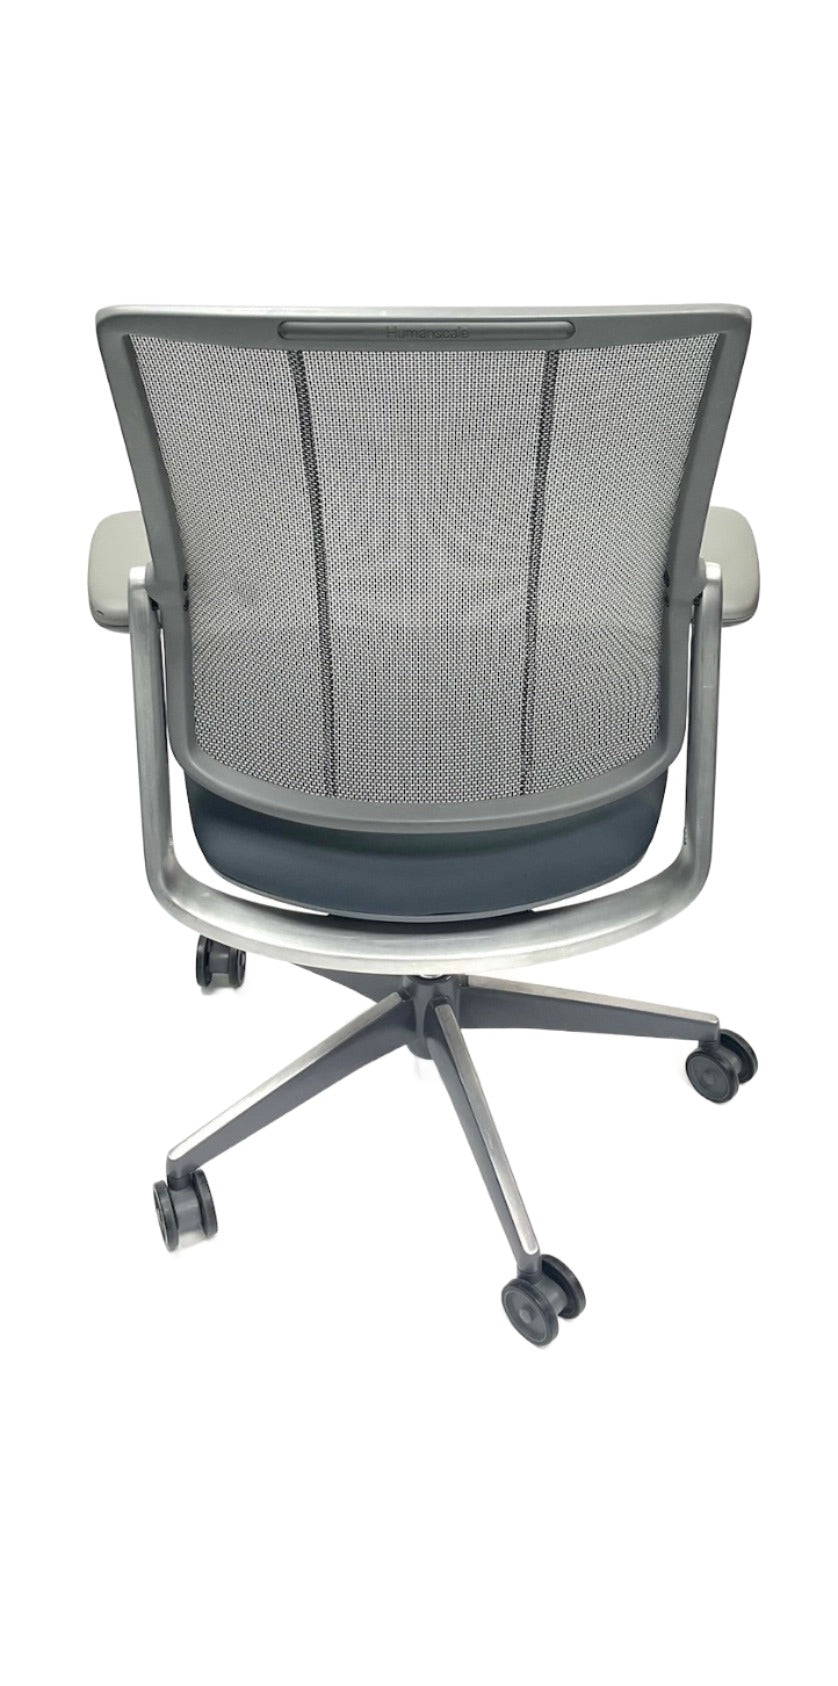 Humanscale Diffrient Task chair